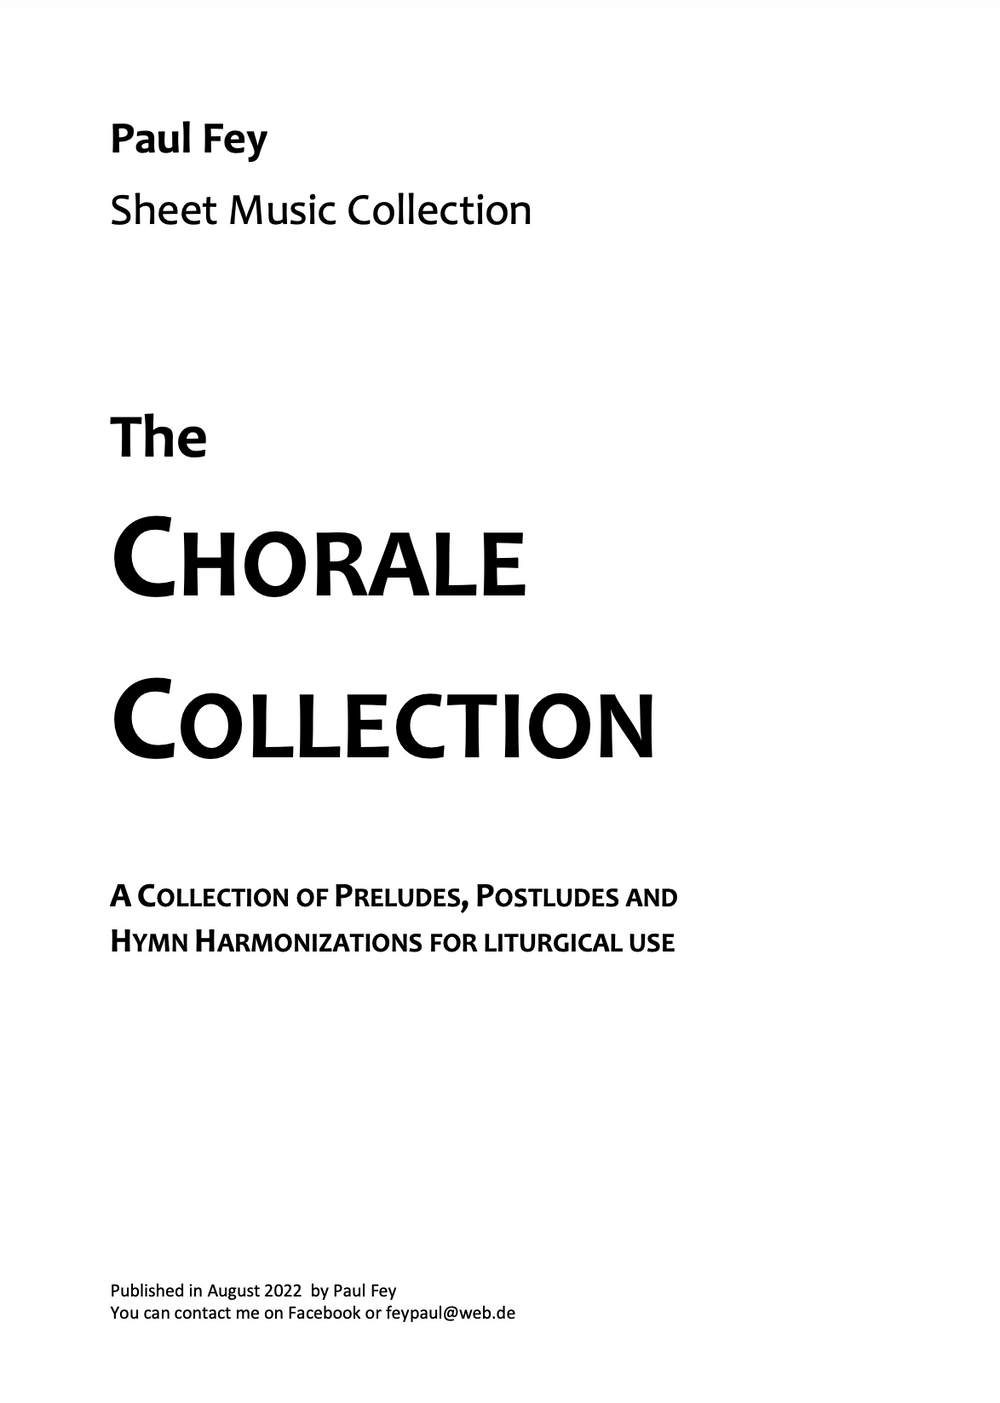 Chorale Collection for Organ (Sheet Music) - Music for Pipe Organ by Paul Fey